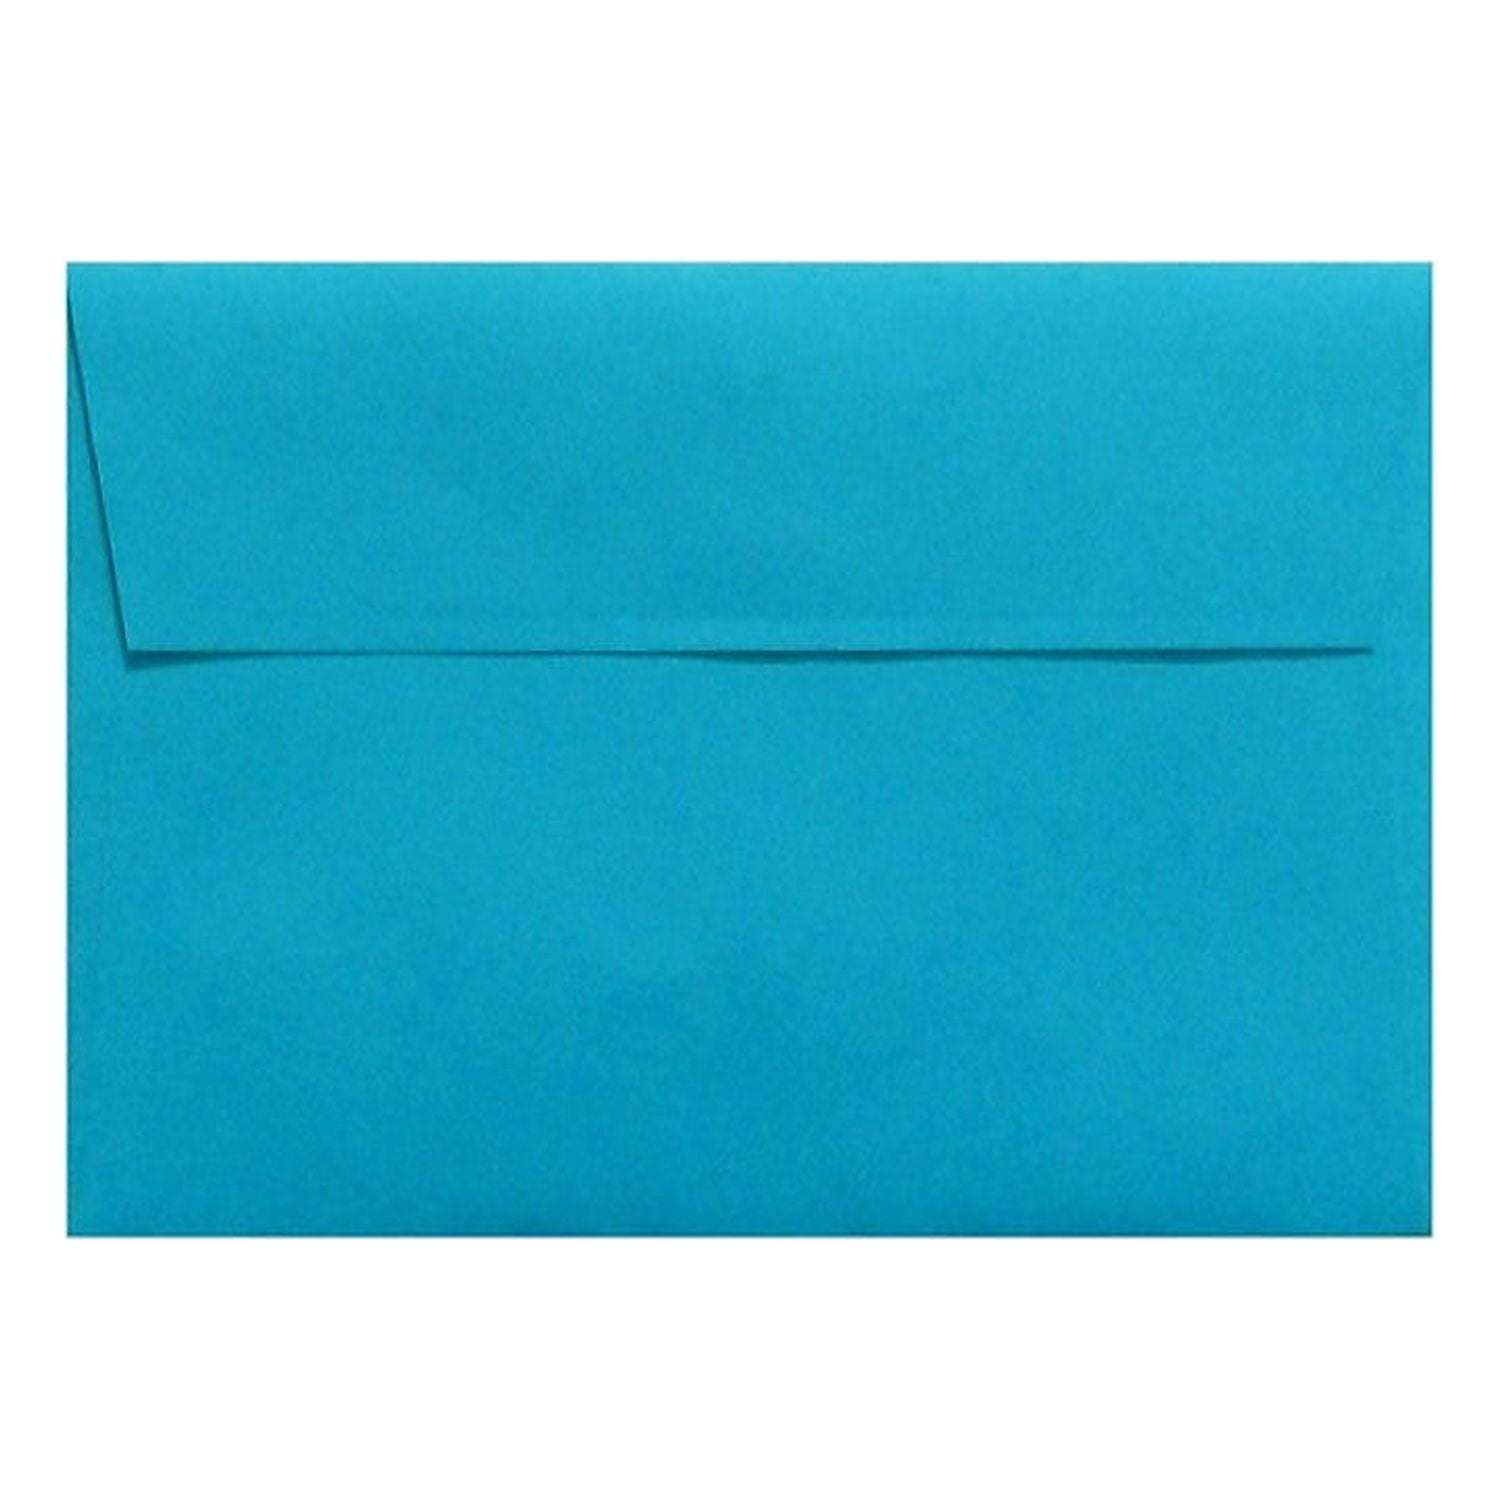 All About Envelope Liners - What are envelope liners? 